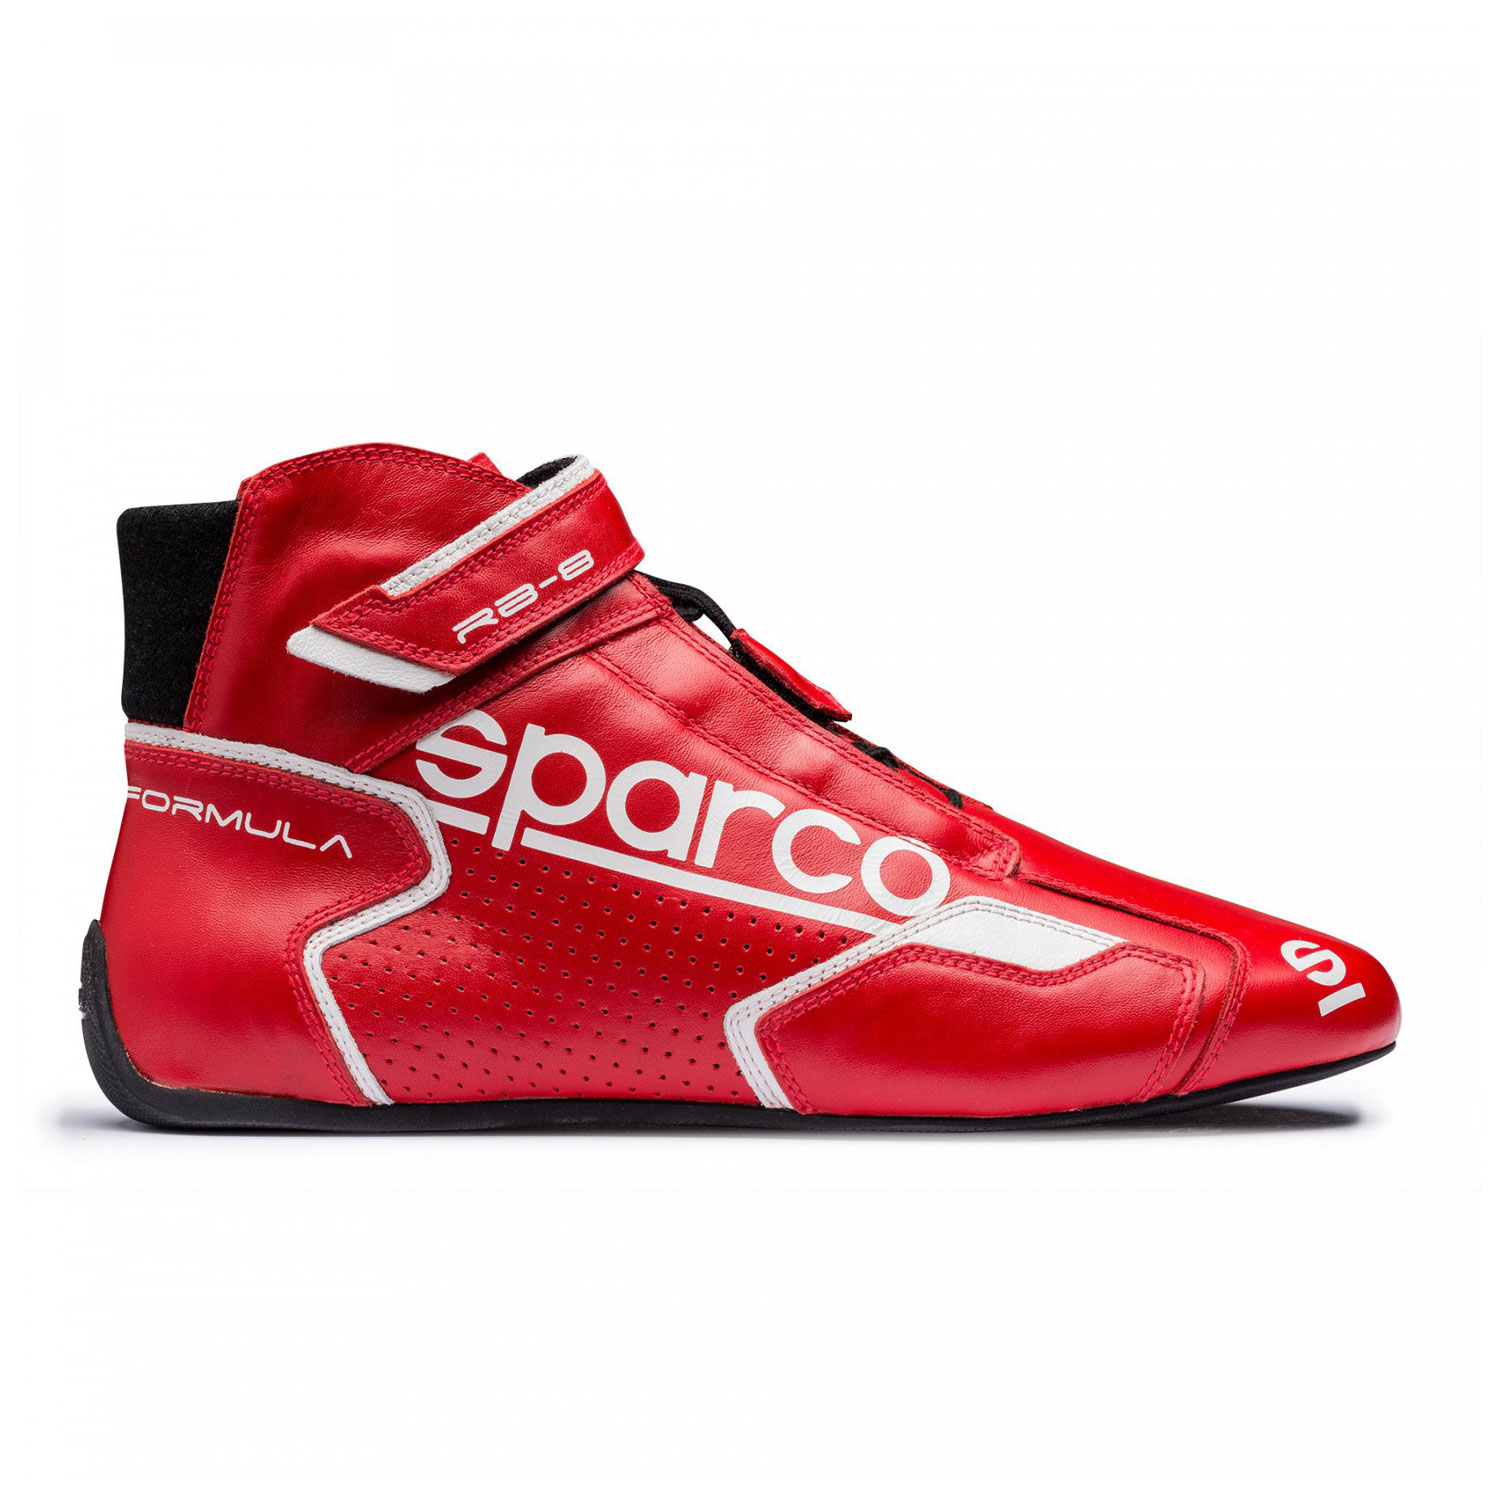 Sparco Italy FORMULA RB8.1 Racing Shoes Red (with FIA homologation